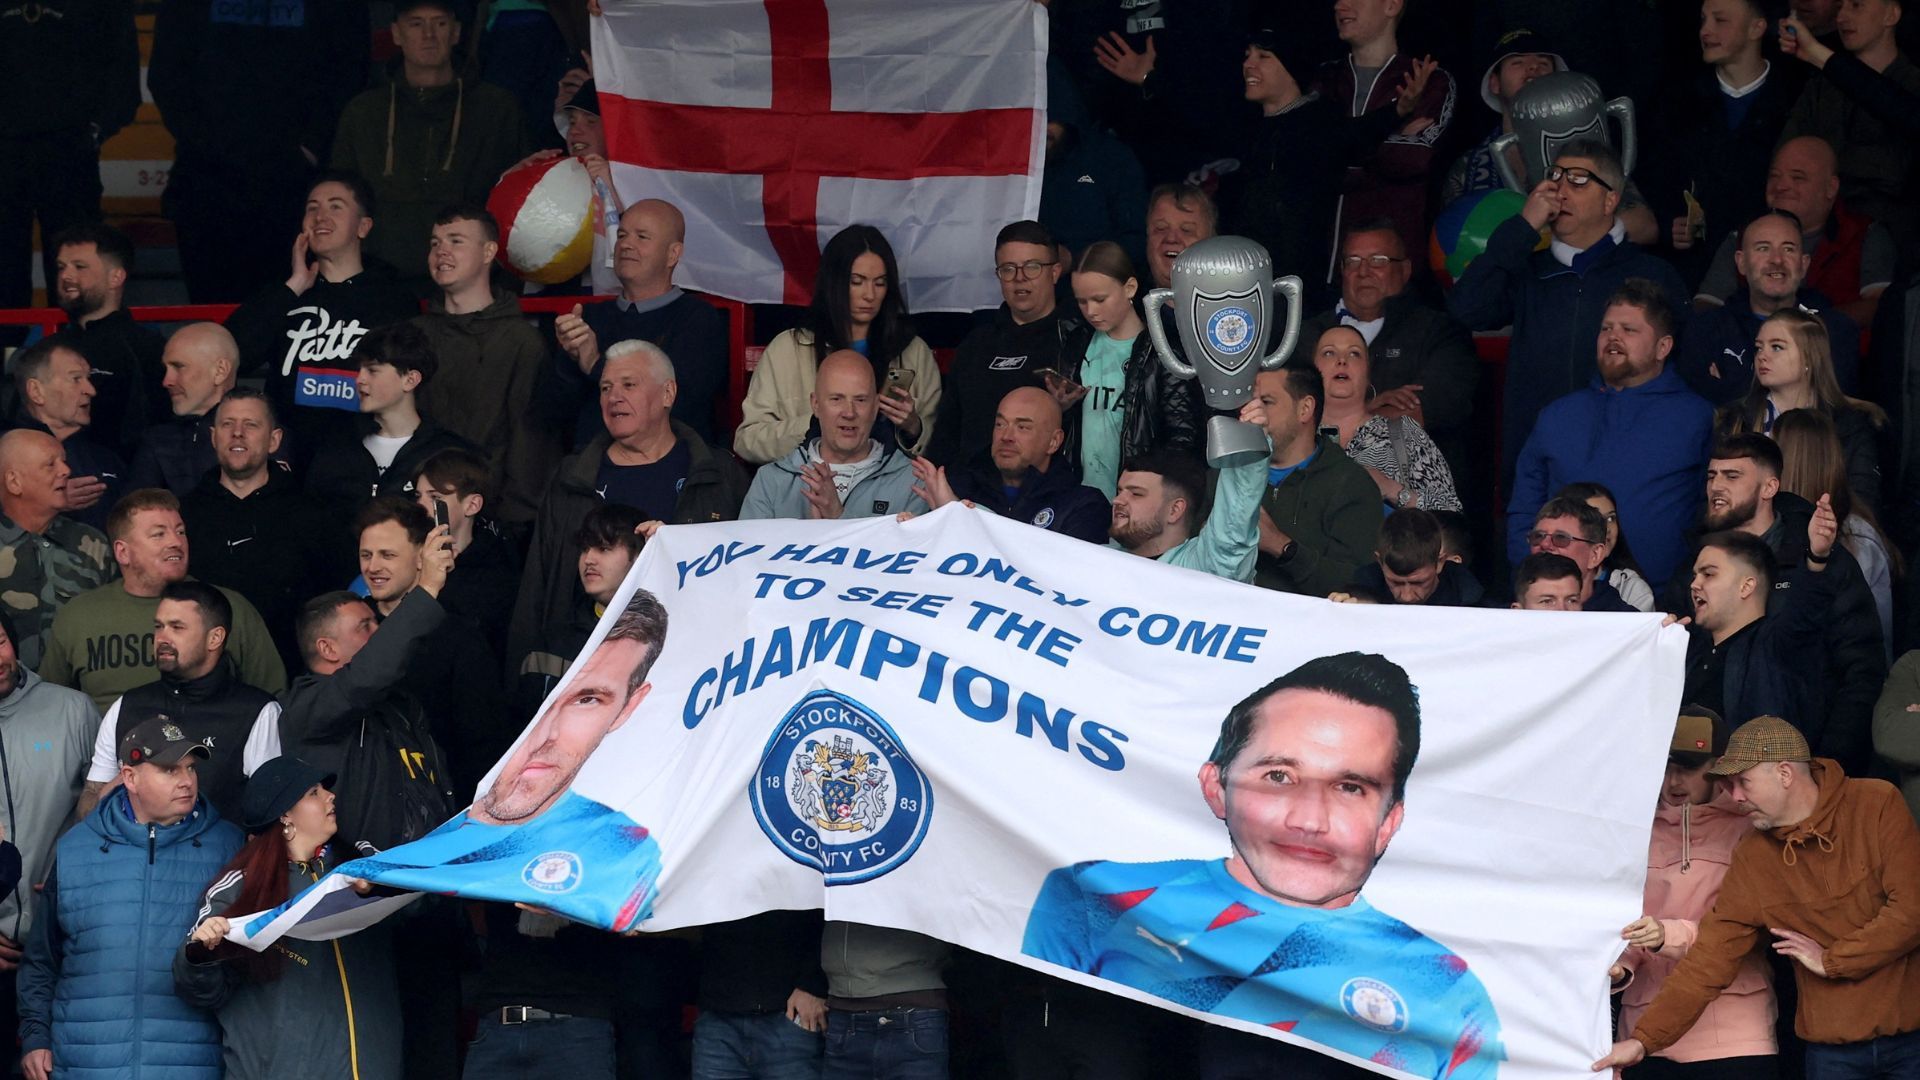 Stockport fans unveil a banner mocking Wrexham's owners